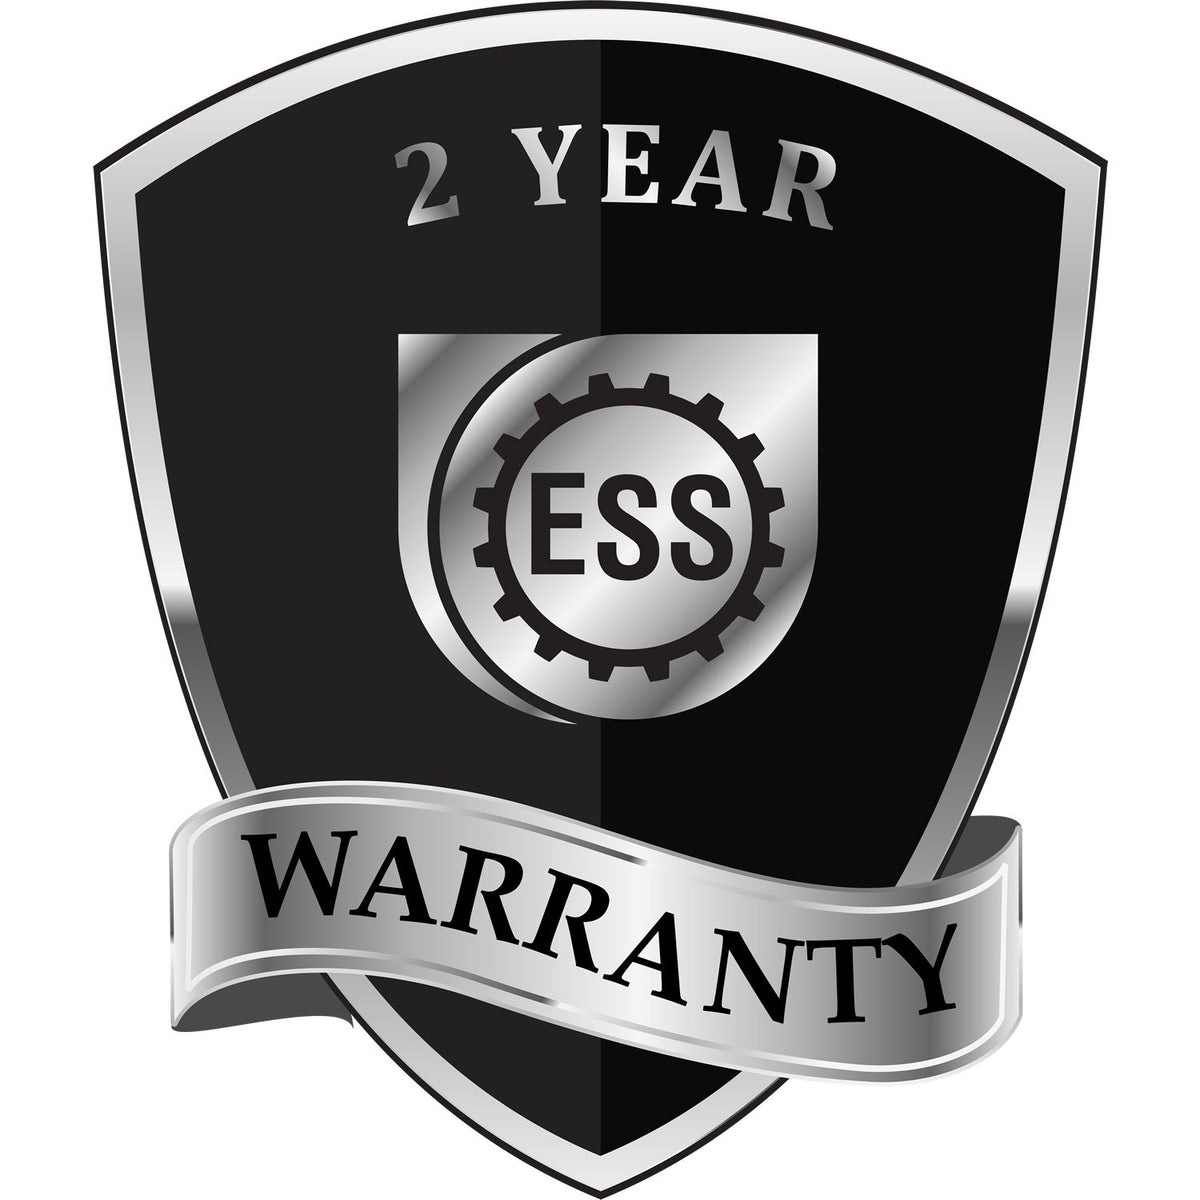 A badge or emblem showing a warranty icon for the Heavy Duty Cast Iron Alabama Architect Embosser